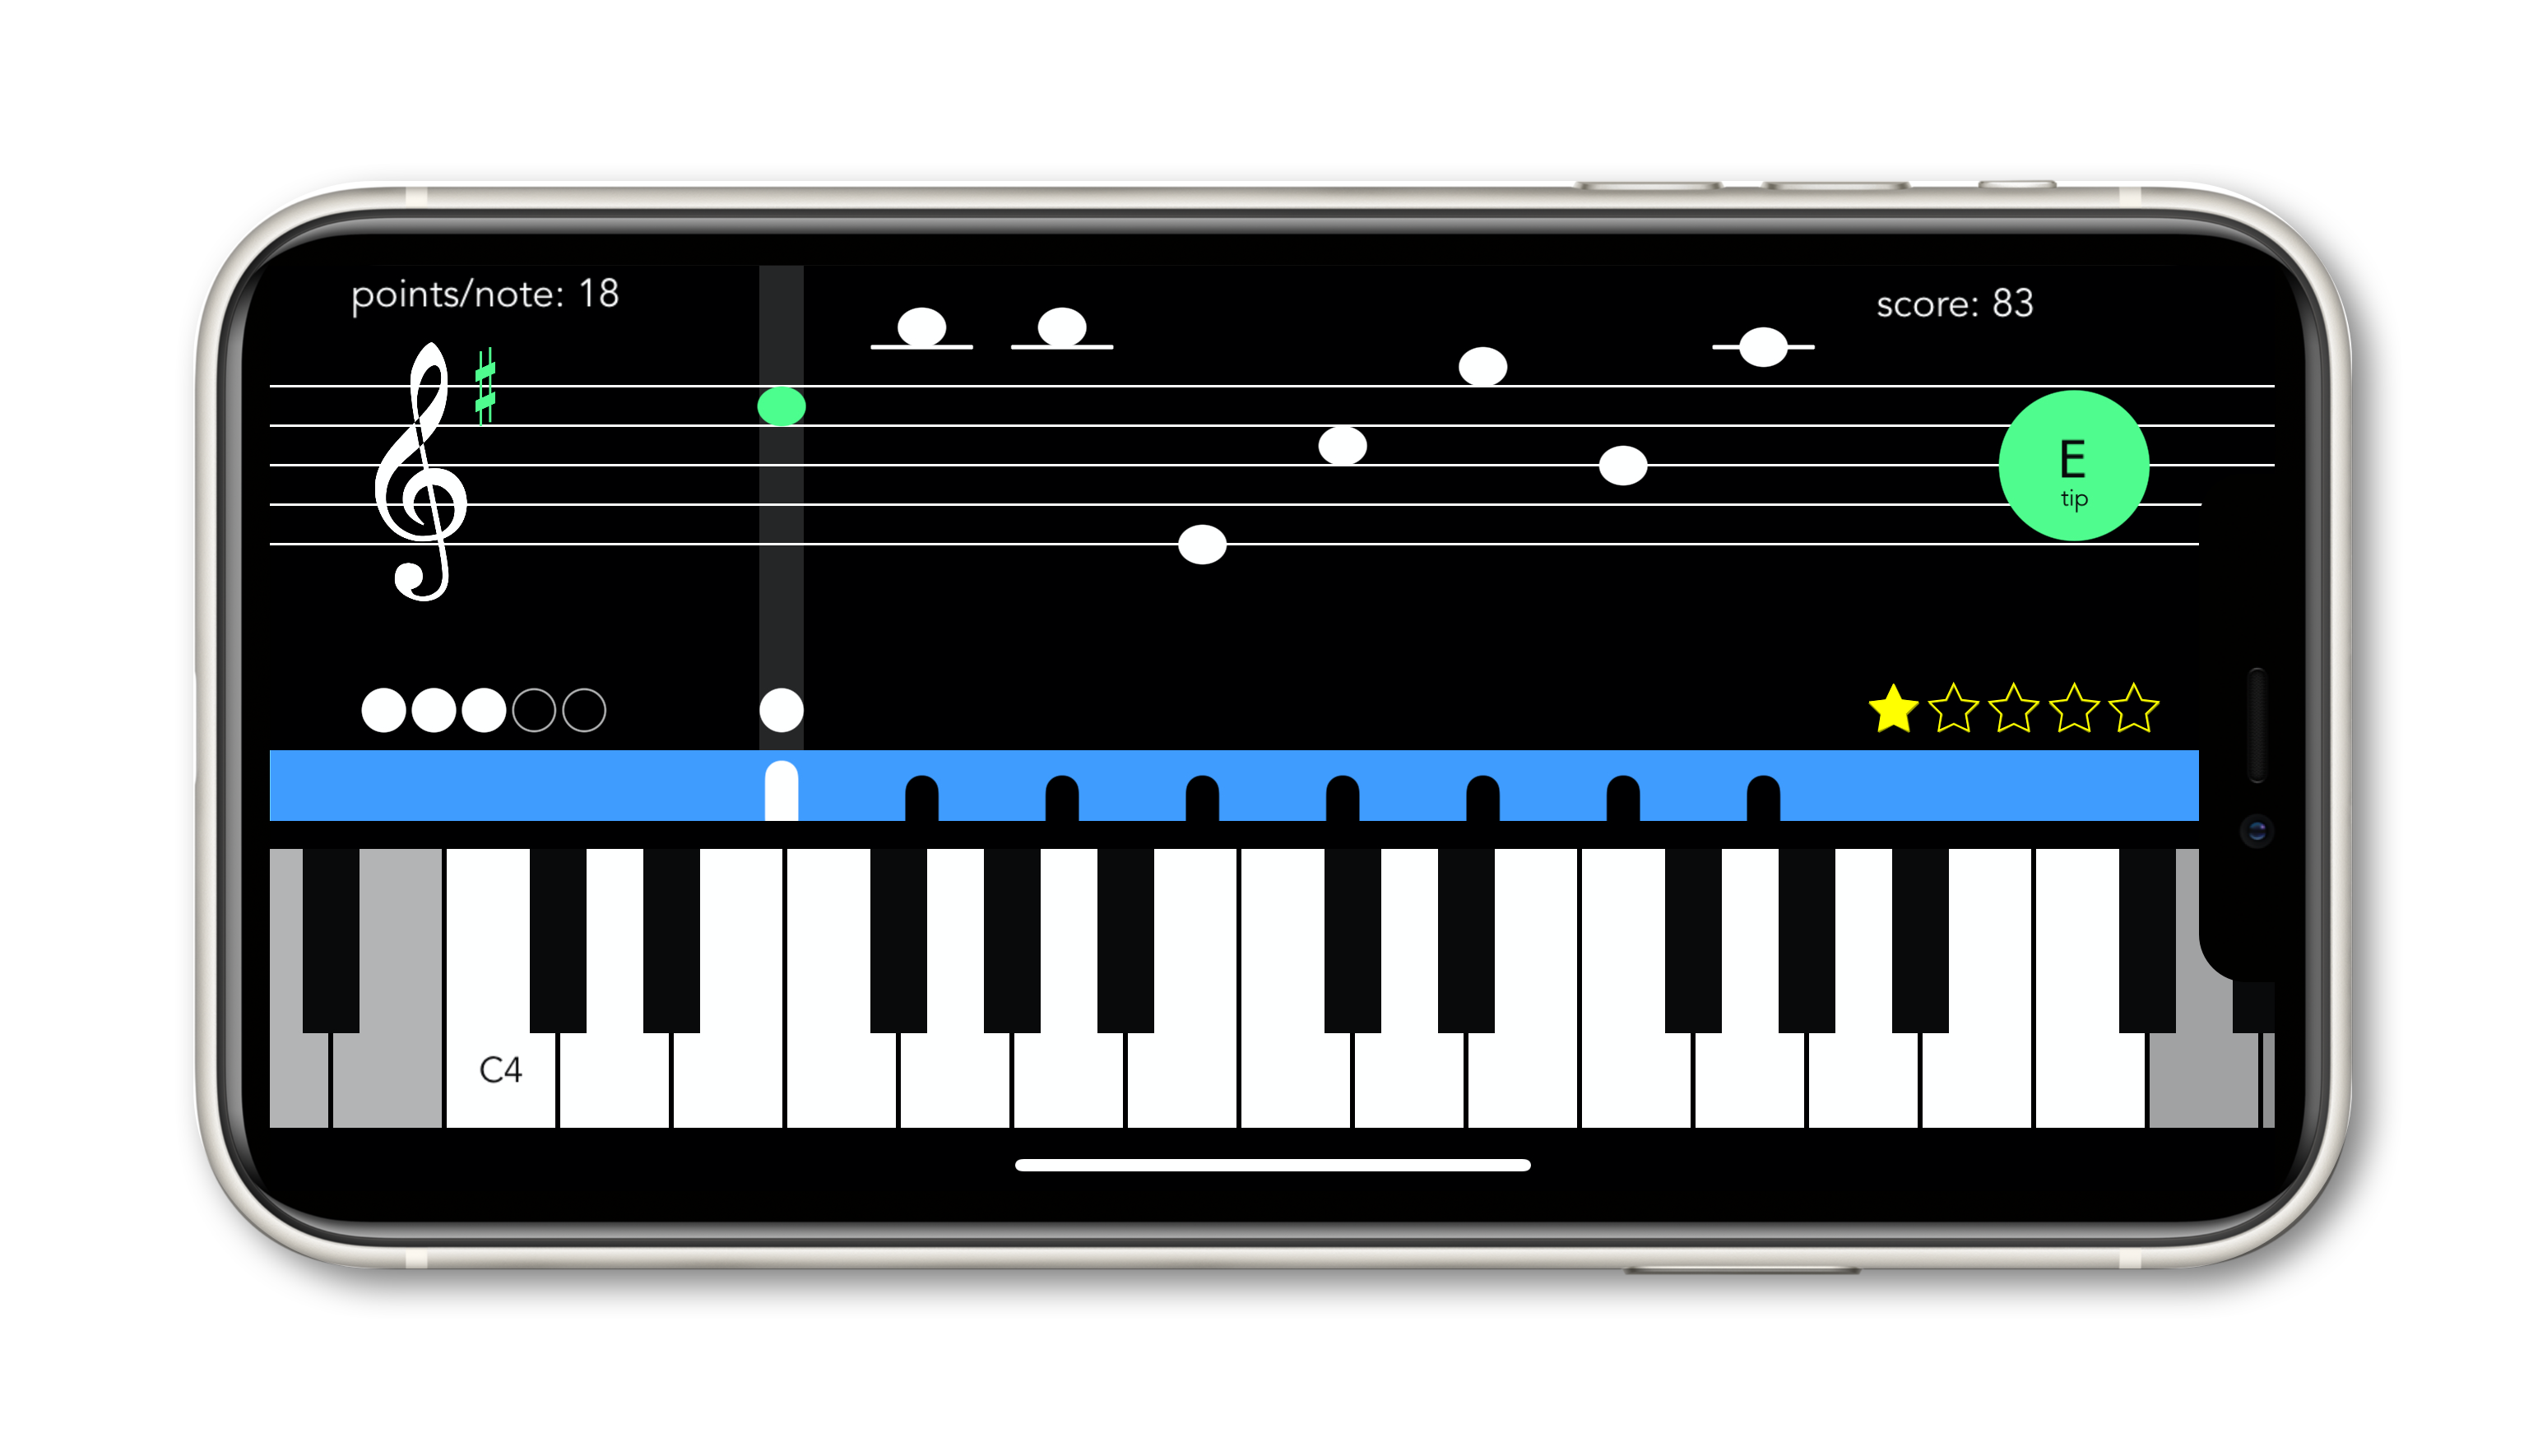 Your new piano app?